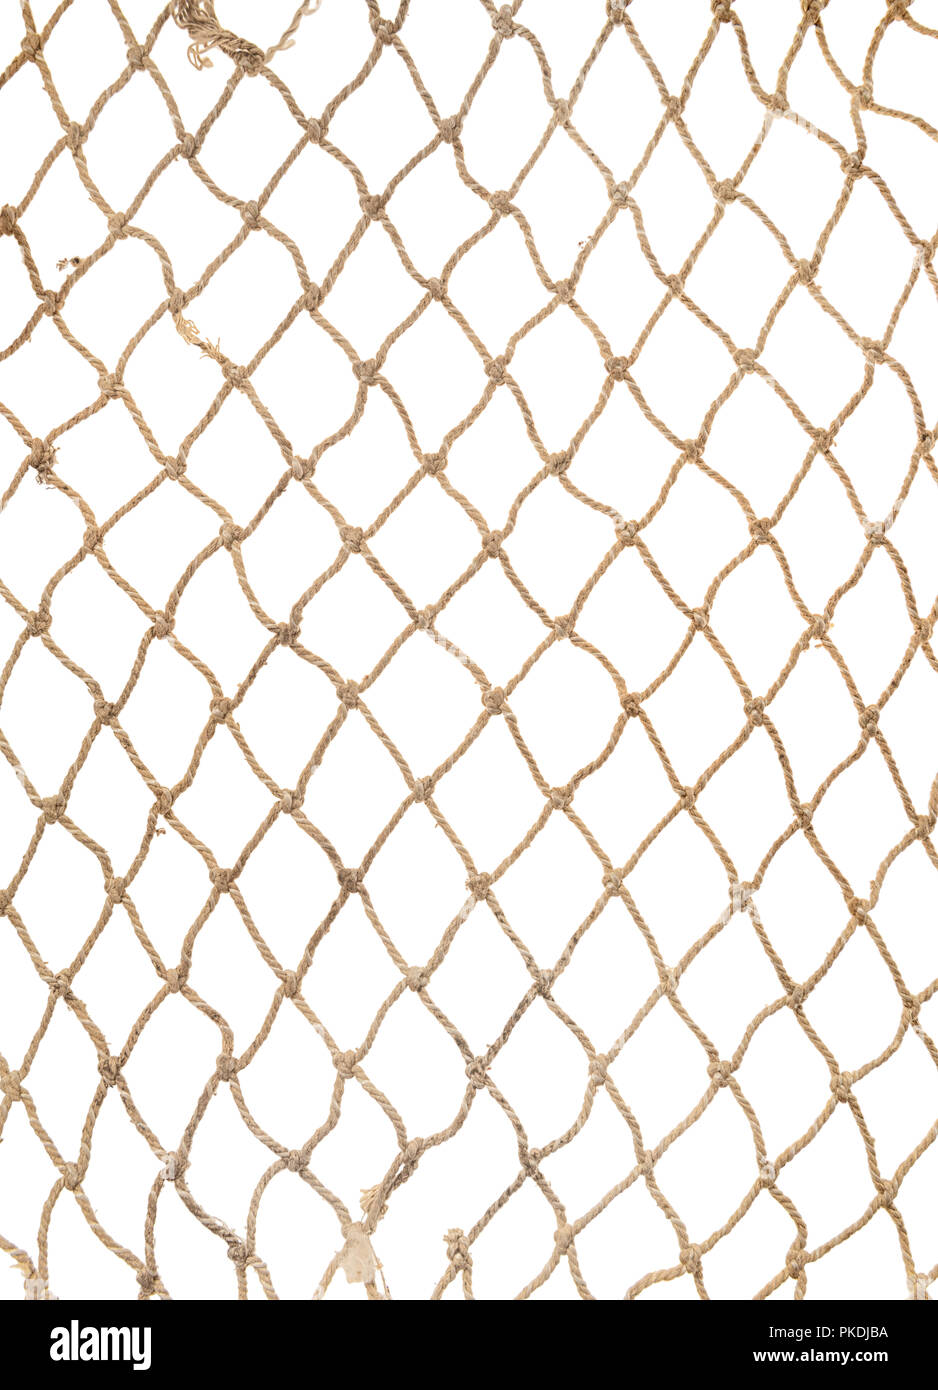 rope net pattern or texture for soccer, football, volleyball